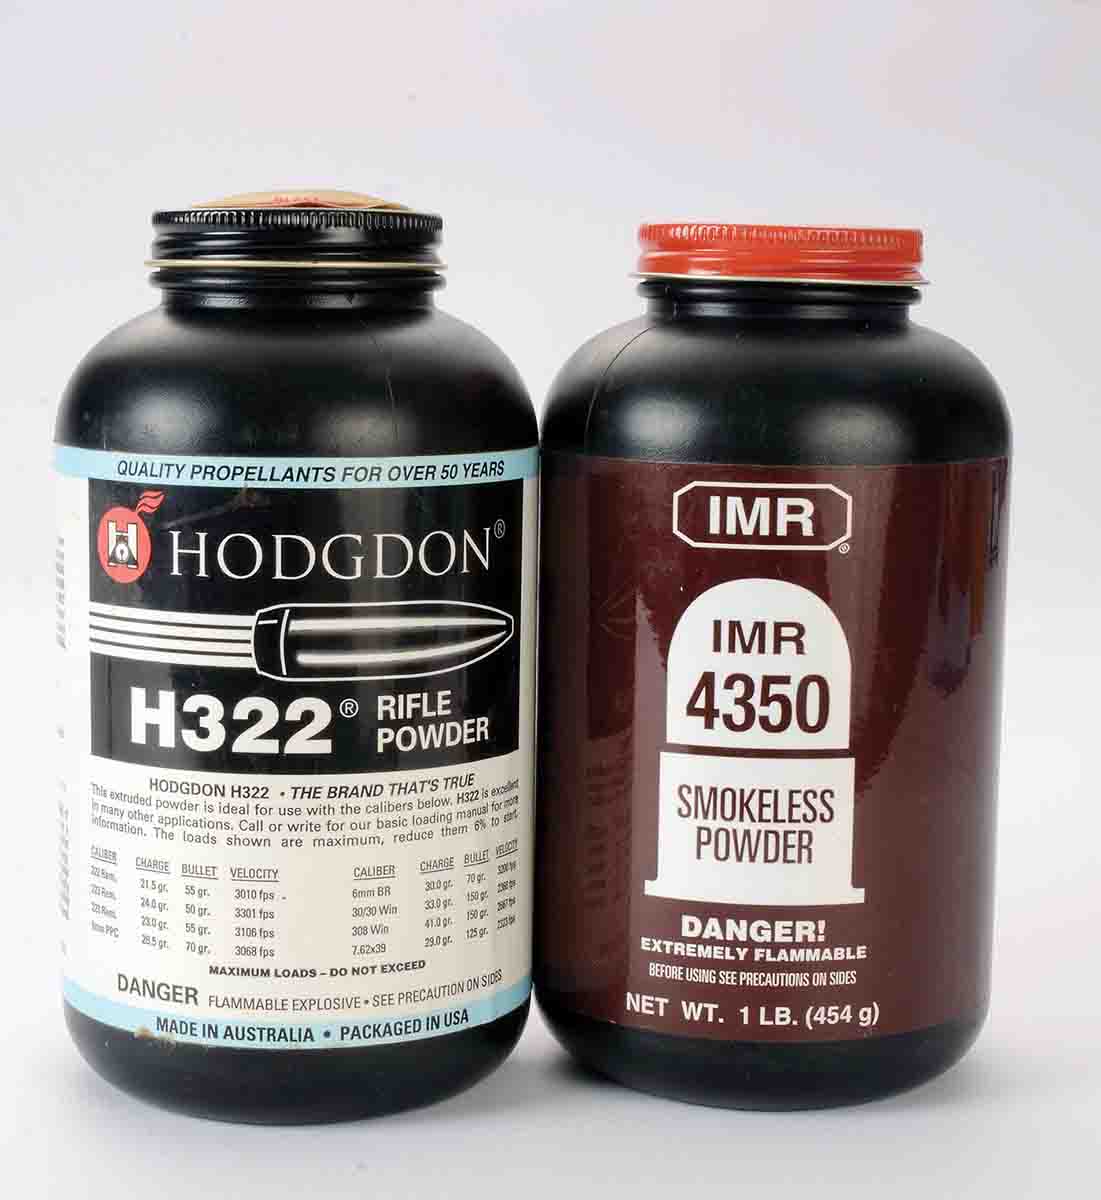 Favorite powders for rifle loads include IMR-4350 (.30-06) and Hodgdon H-322 (.223 Remington).